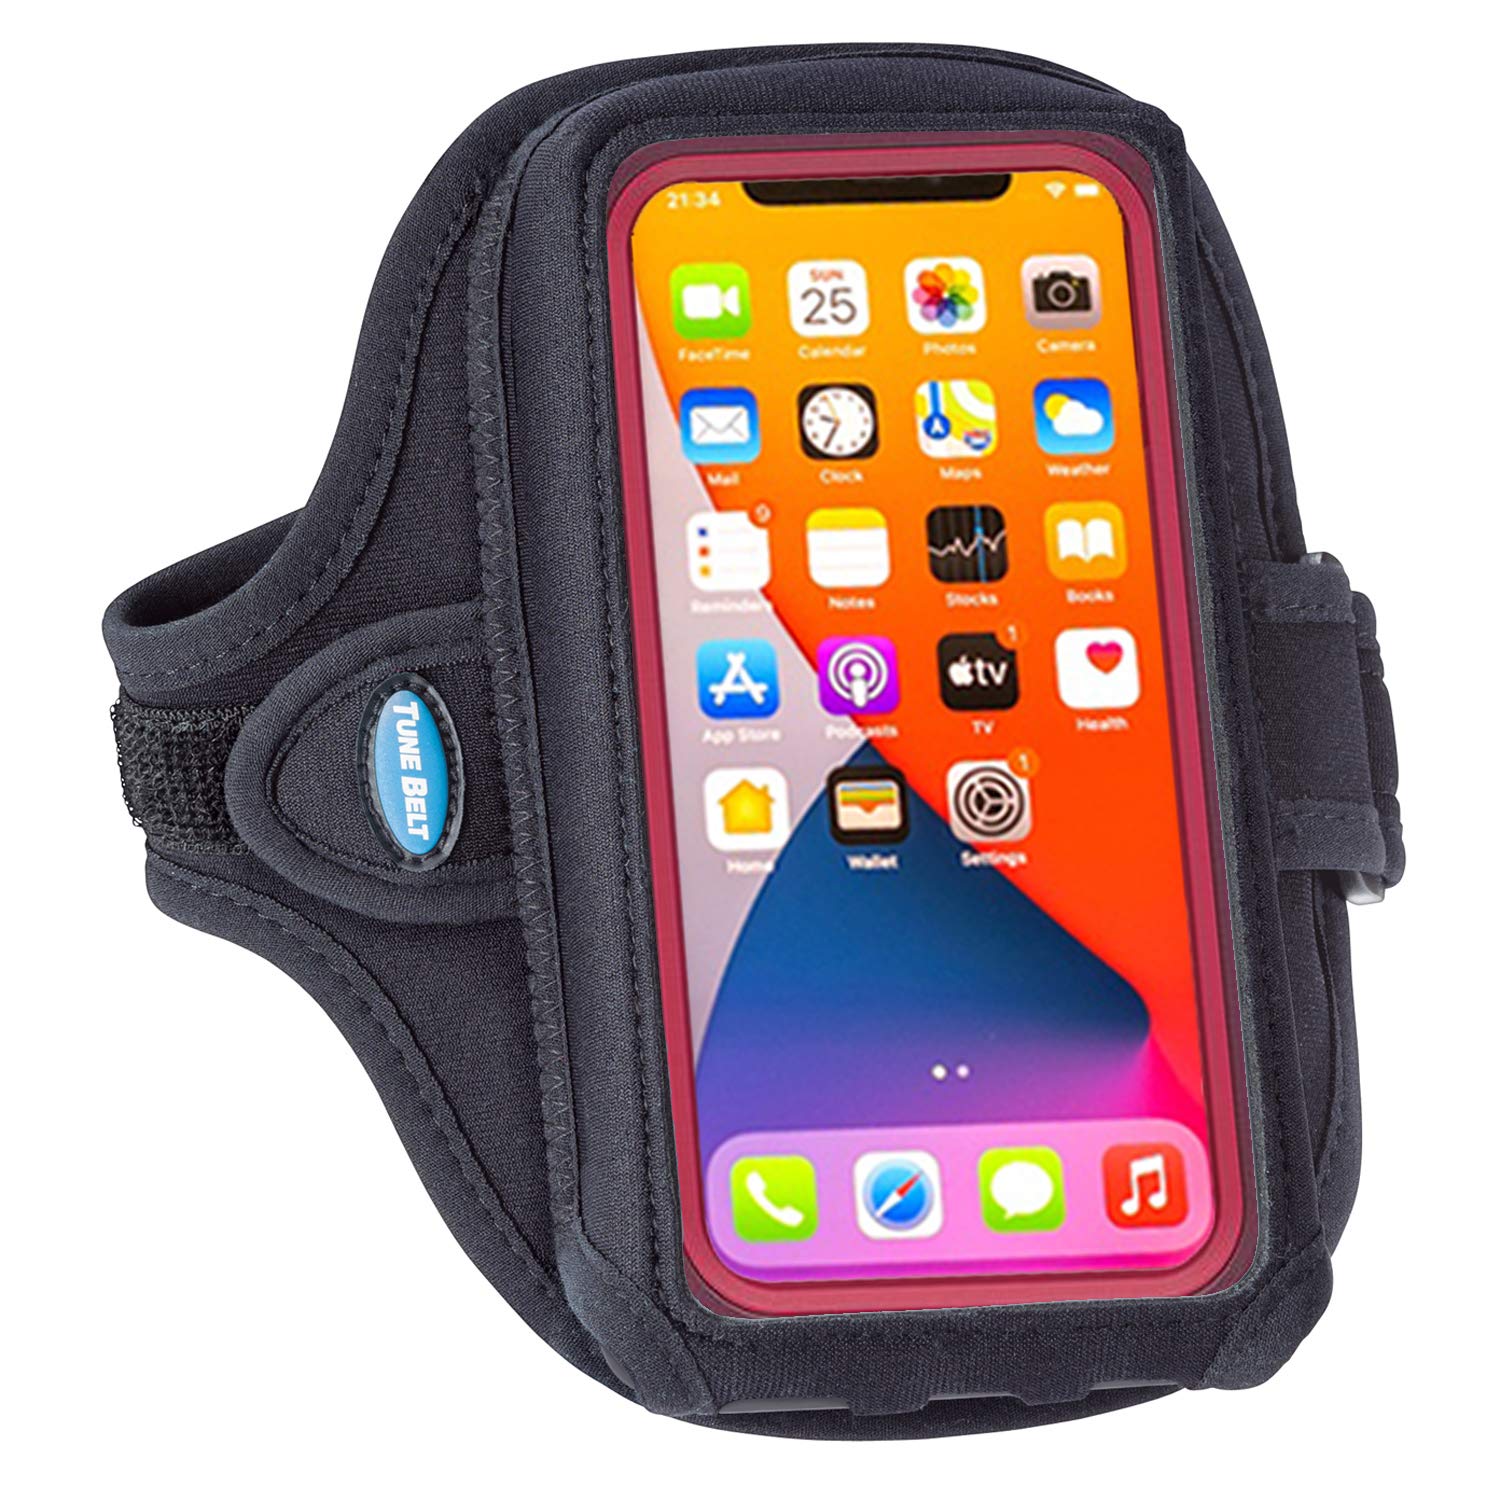 Tune Belt AB92 Cell Phone Running Armband for iPhone 11/12 Pro Max, 11/XR/XS Max/8 Plus and Galaxy Note/Plus/Ultra (Extra Depth fits Large Case) for Running, Exercise & Working Out